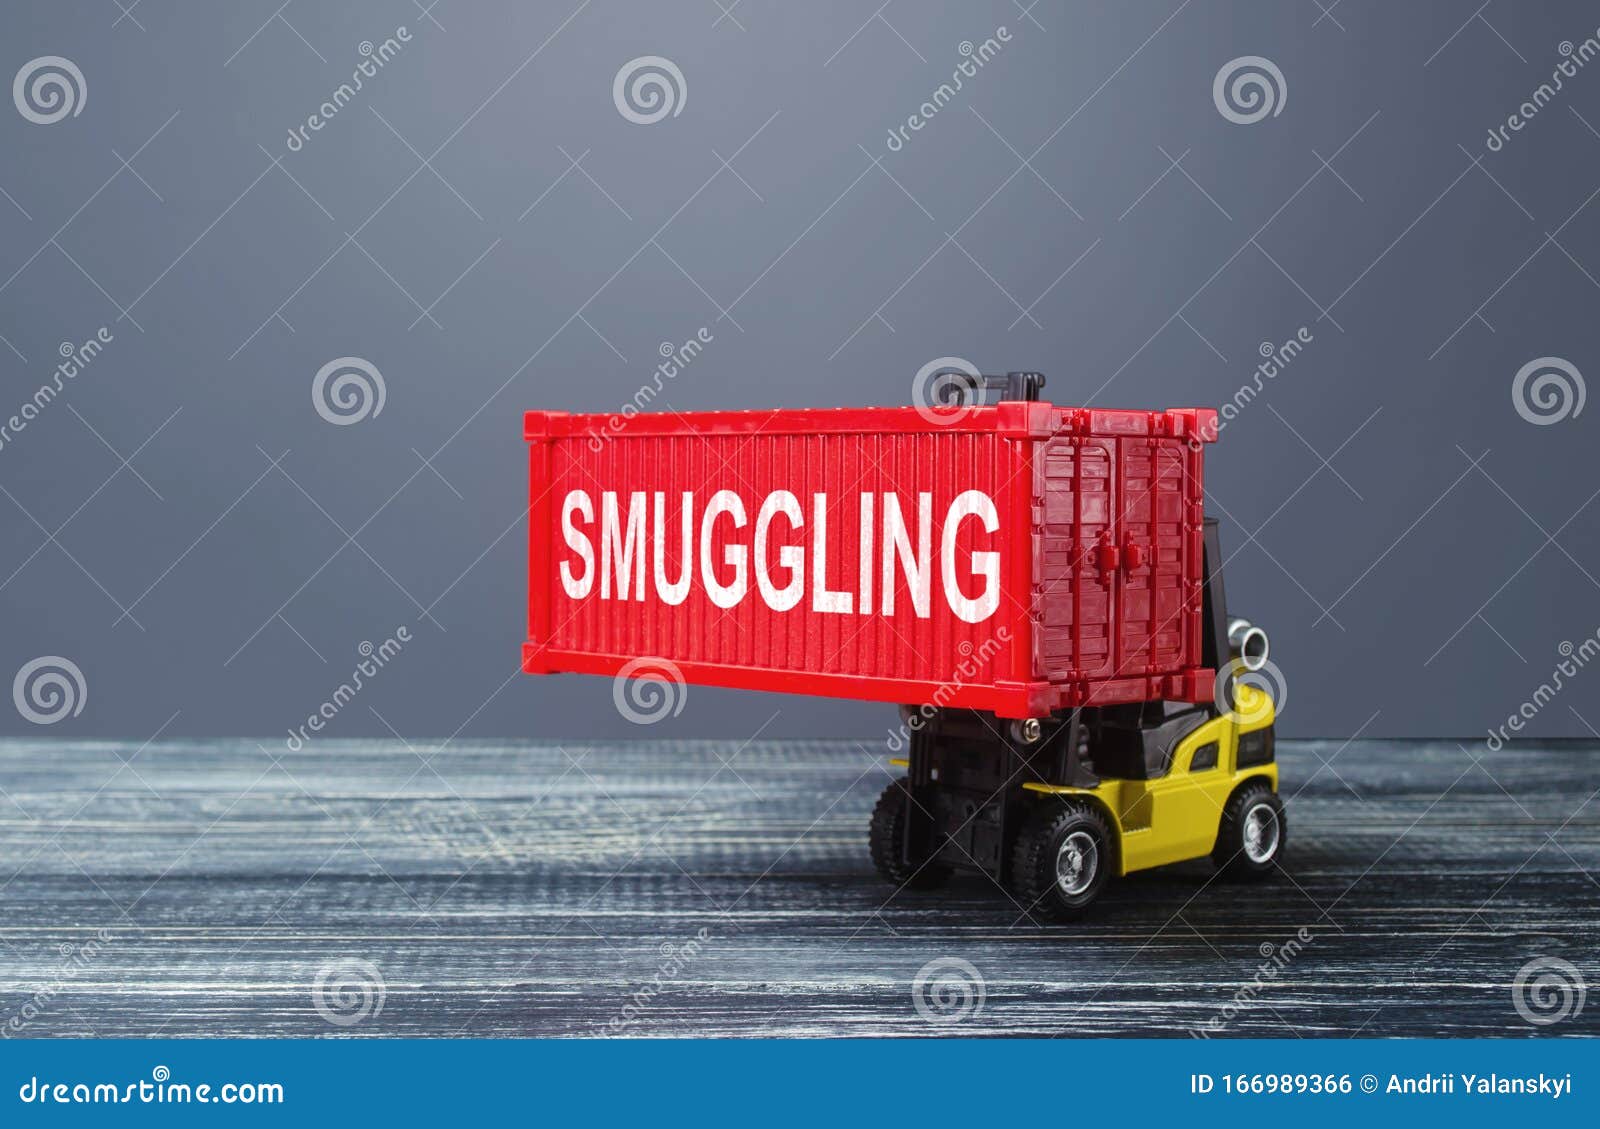 a forklift truck carries a red container labeled smuggling. transportation of illegal prohibited goods. border control, high